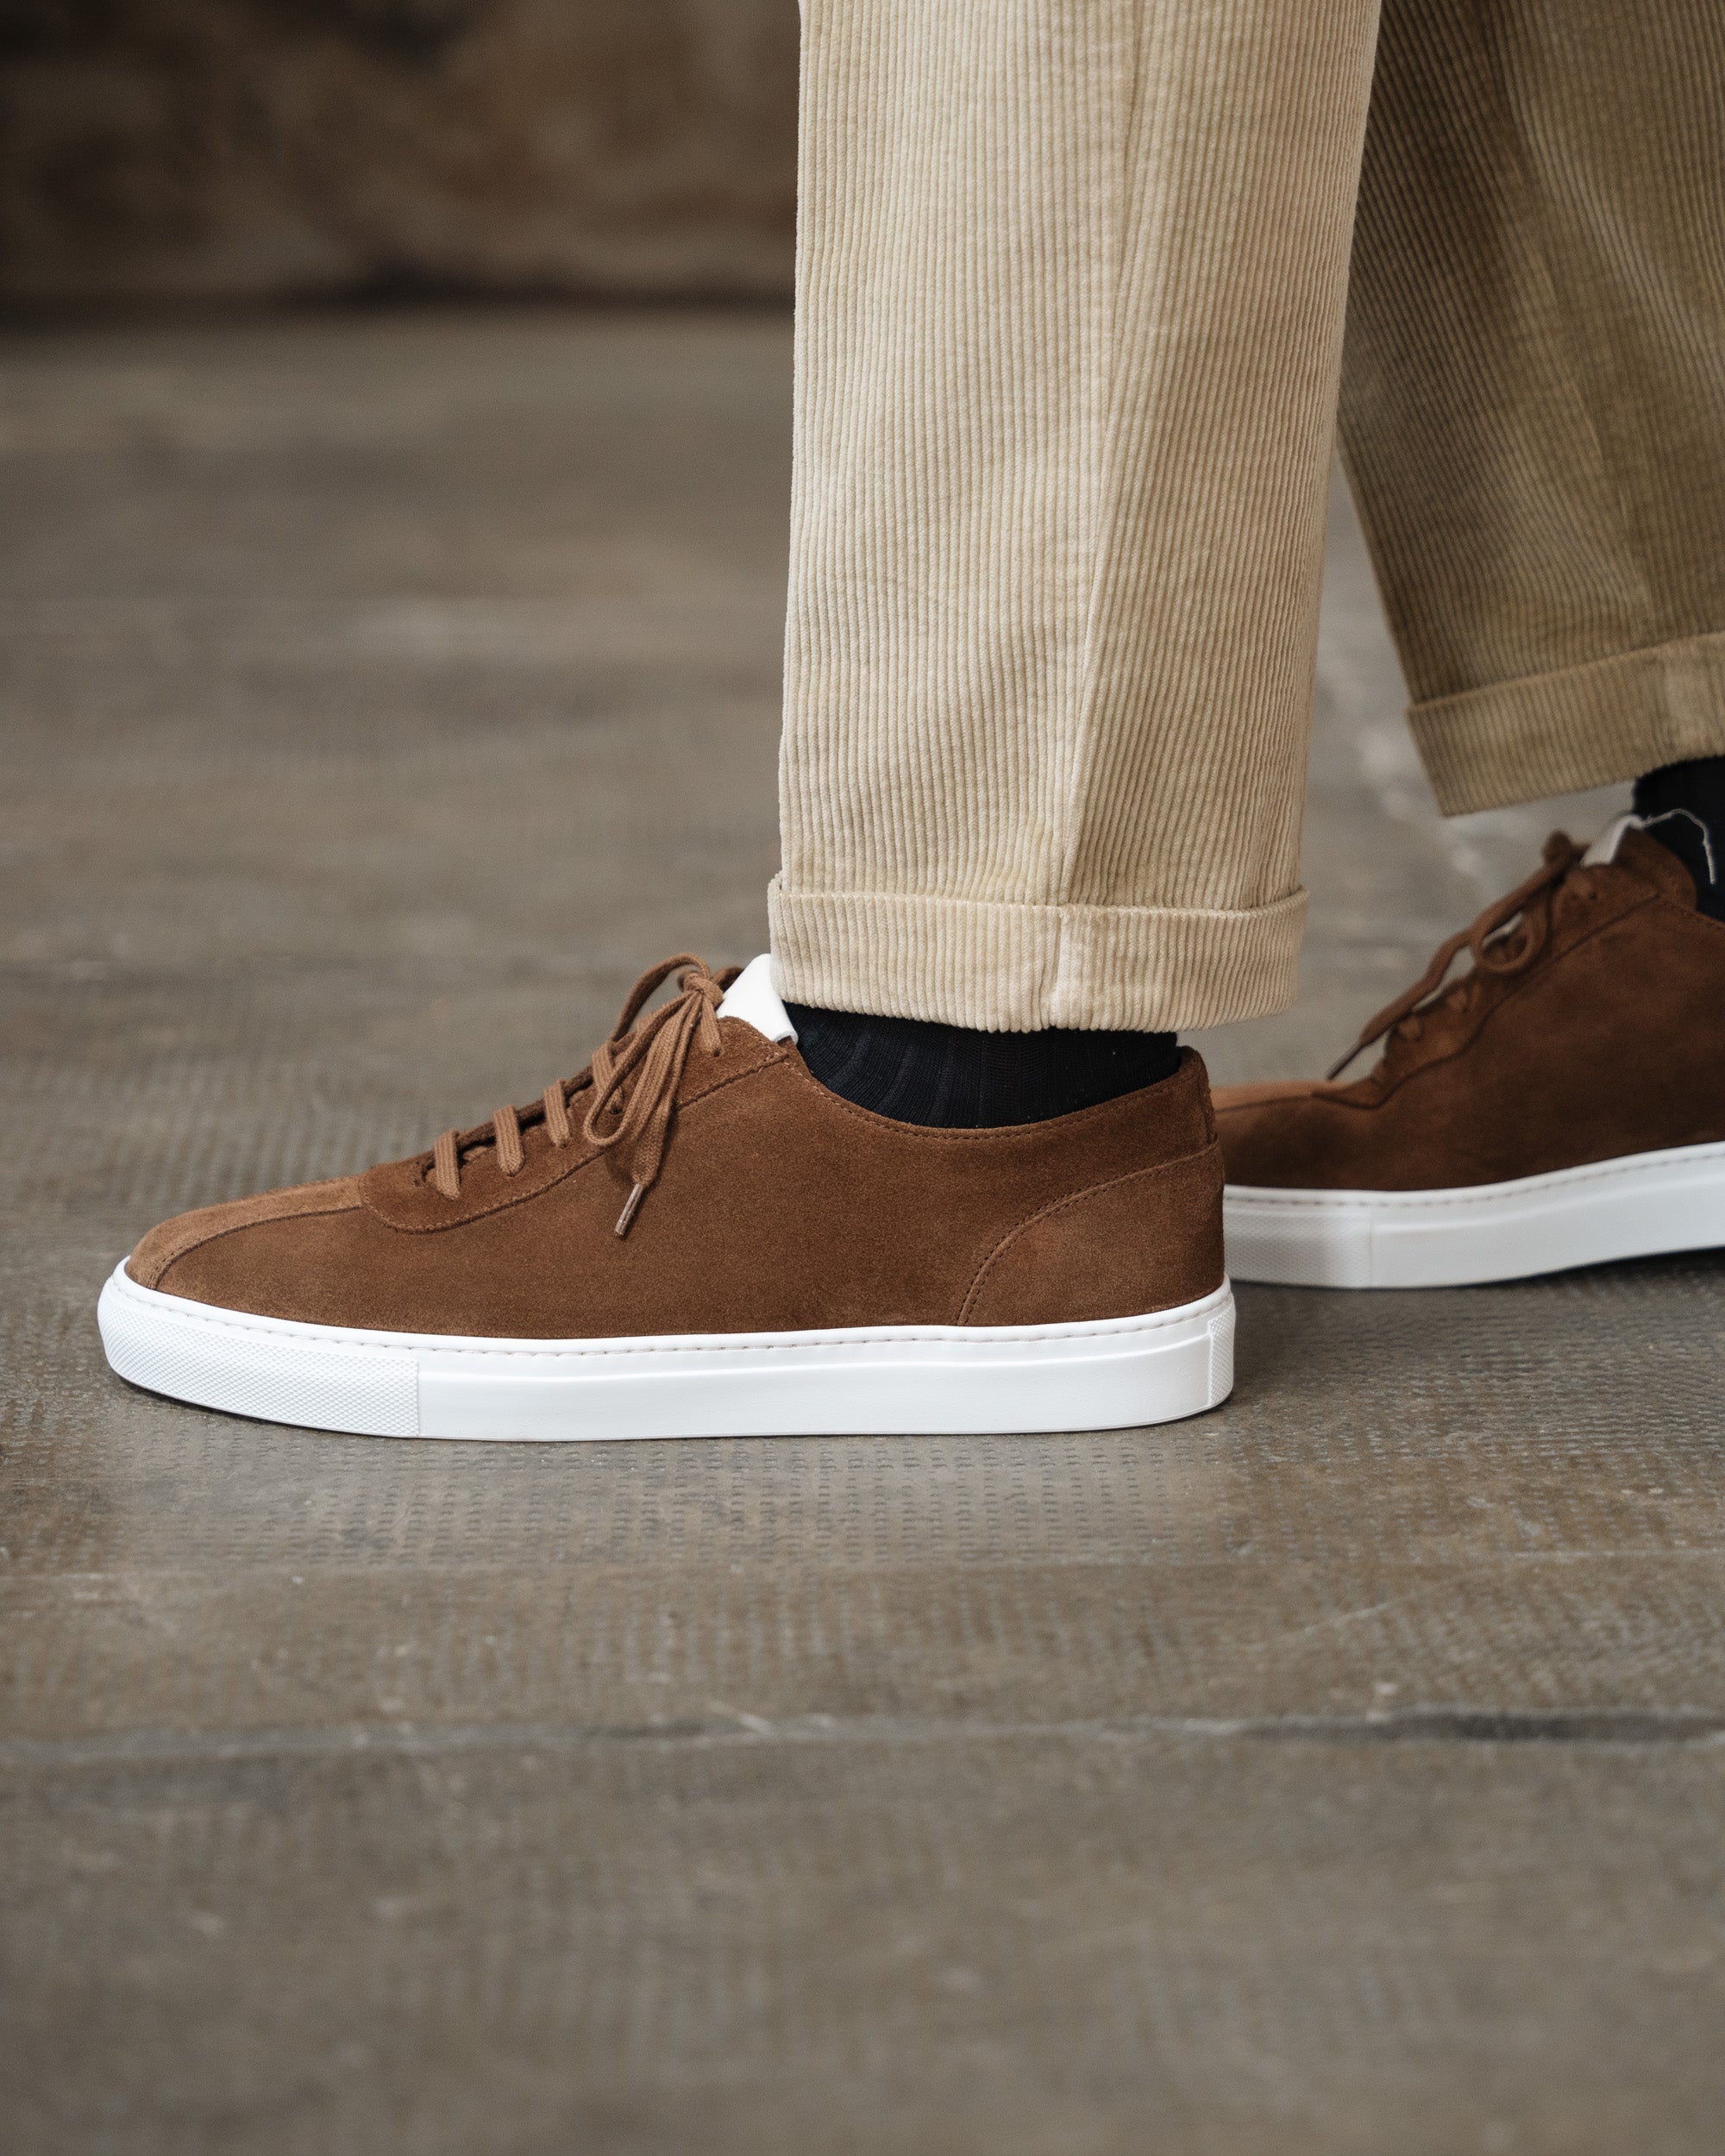 Velasca | Brown suede leather sneakers, 100% Made in Italy